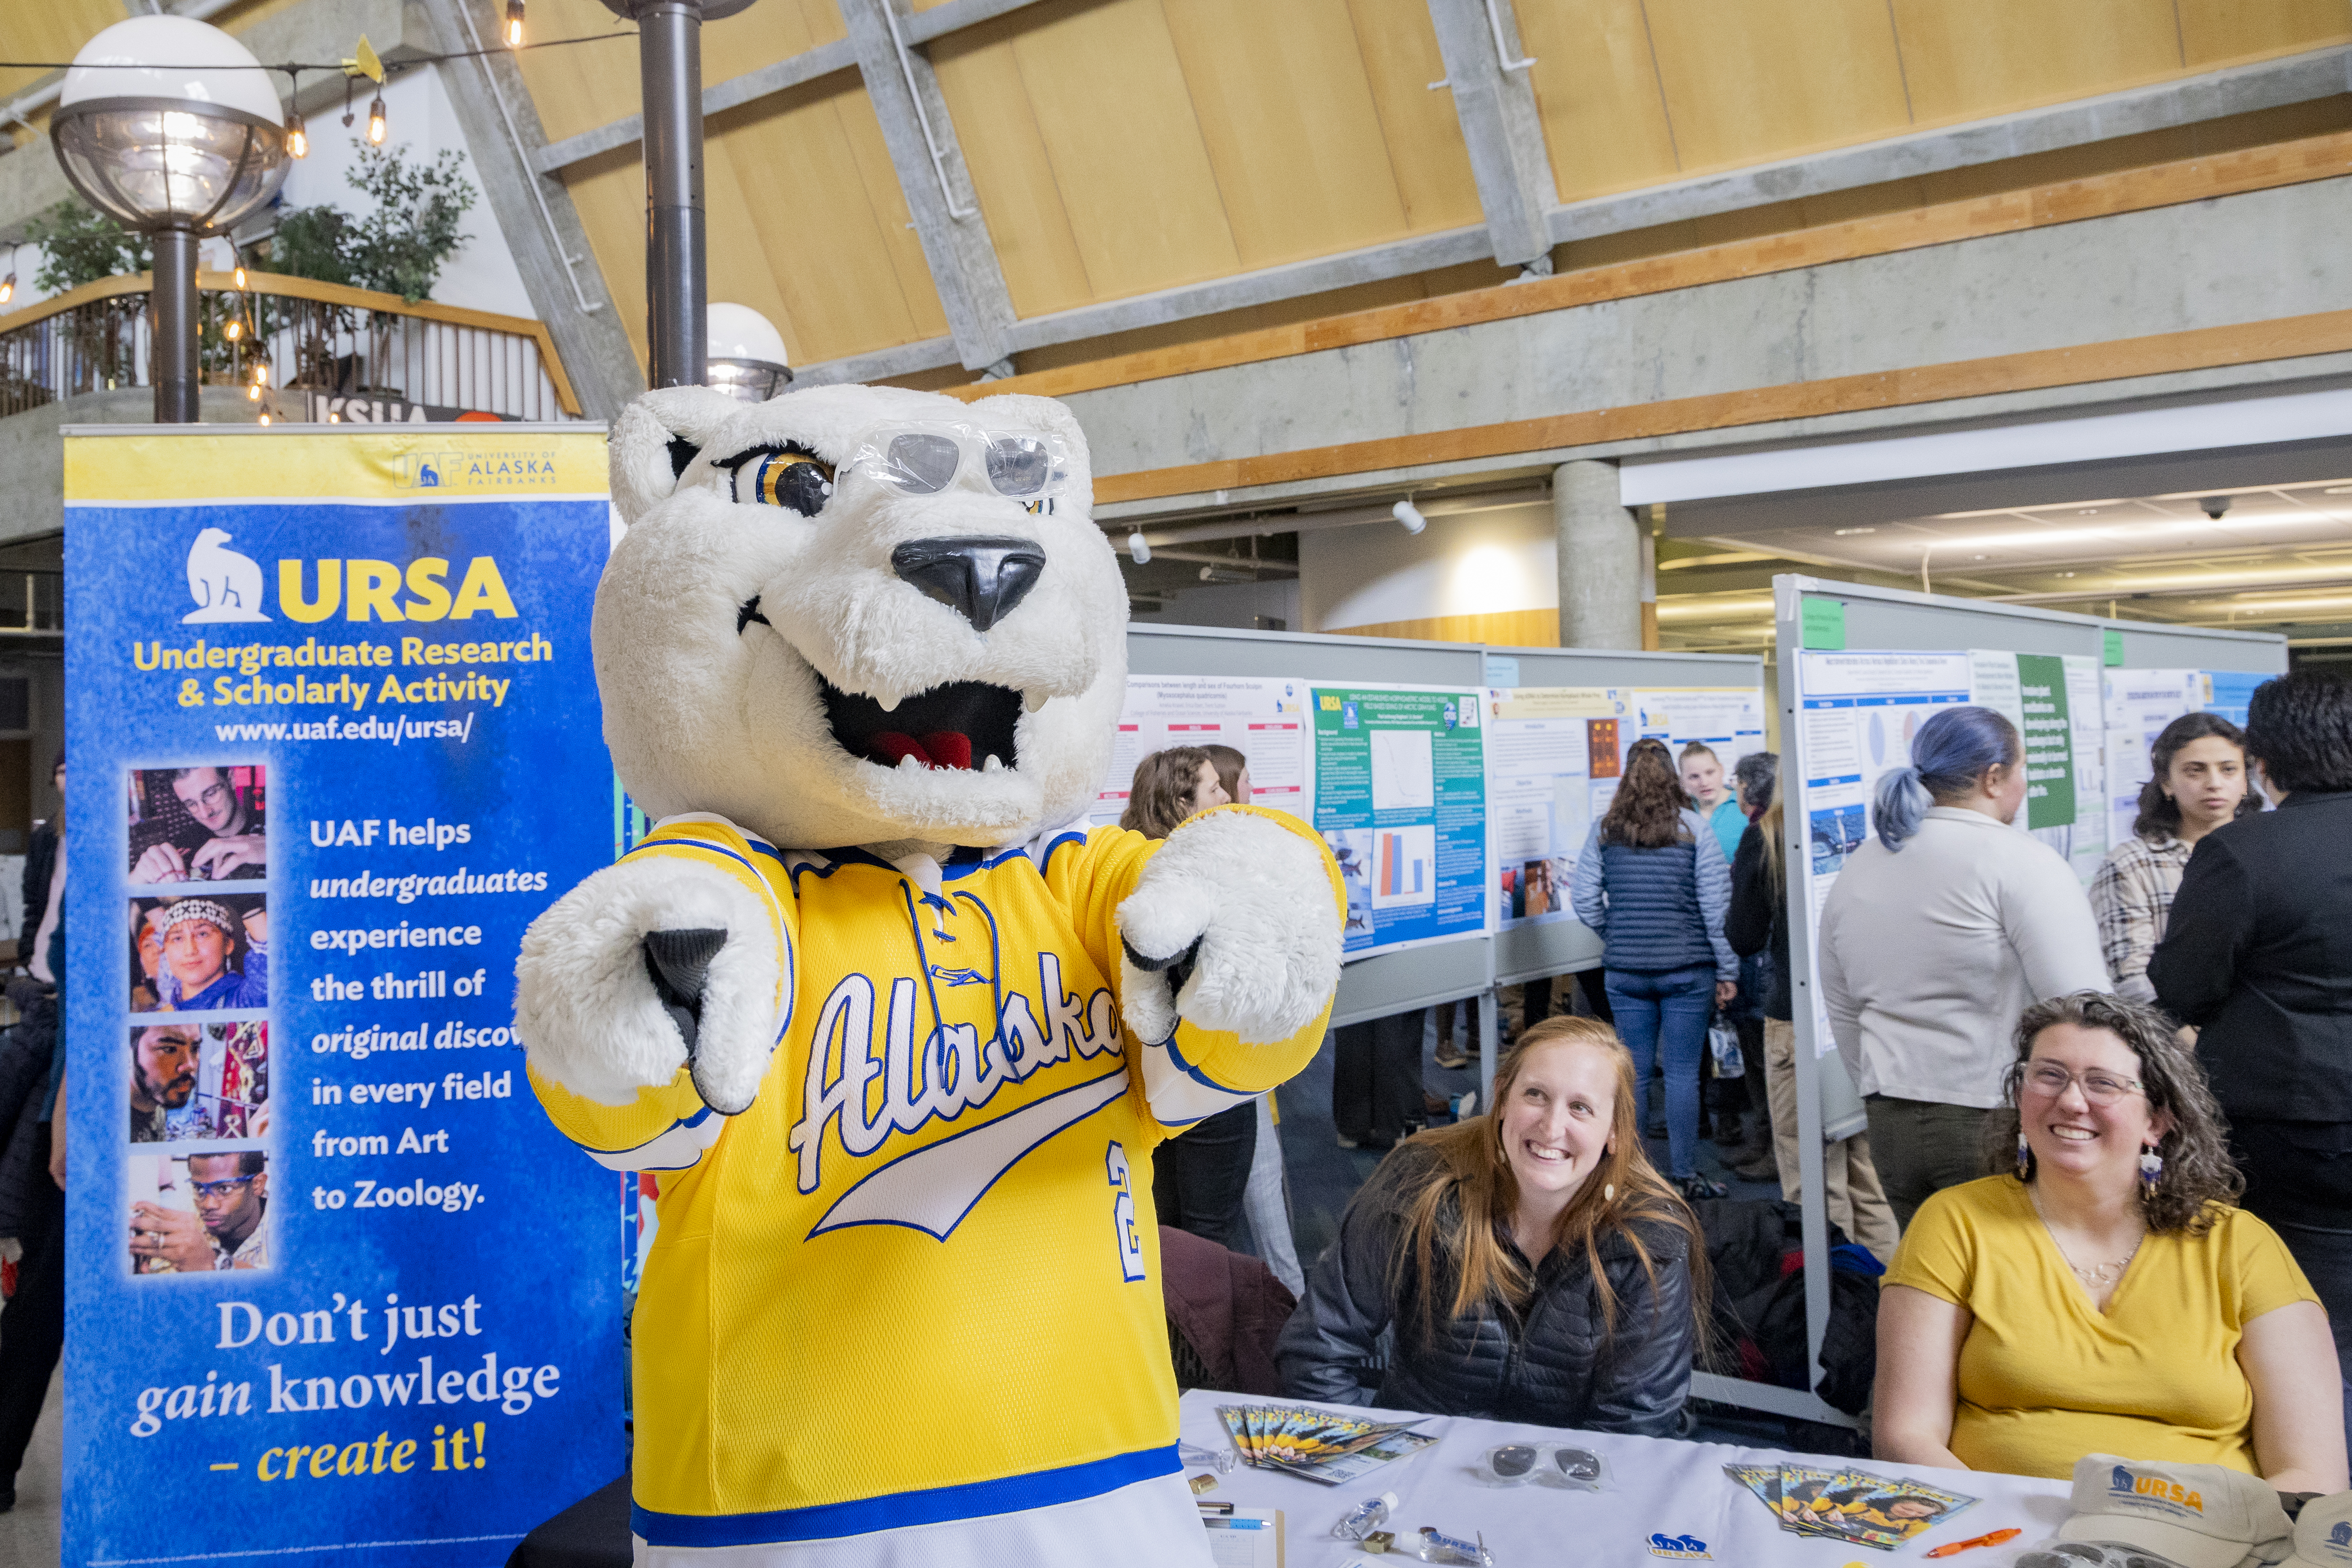 A mascot bear poses near a table with people.